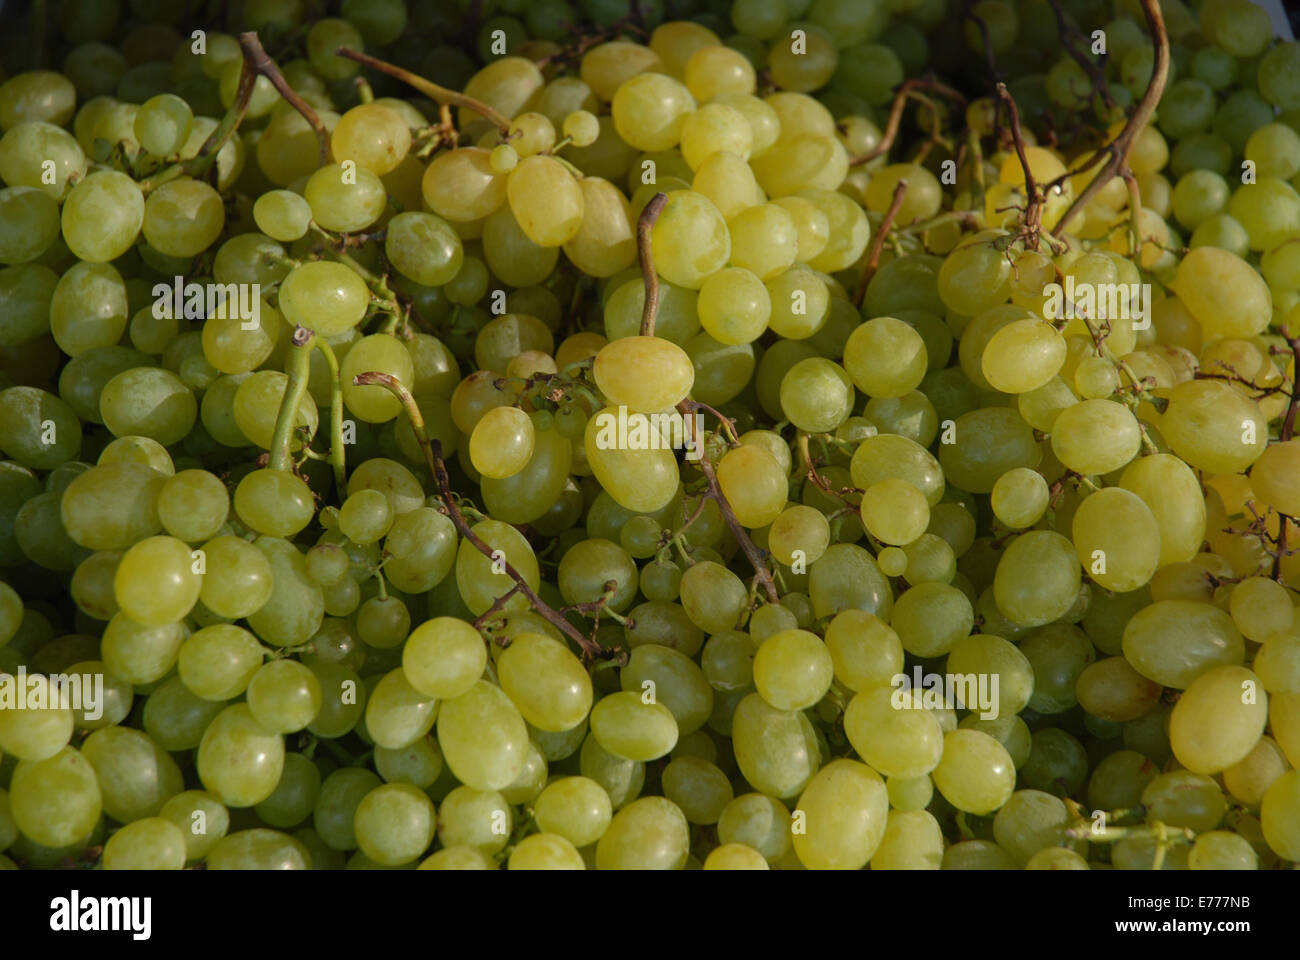 Grapes for sale on a market stall in Spain. Stock Photo